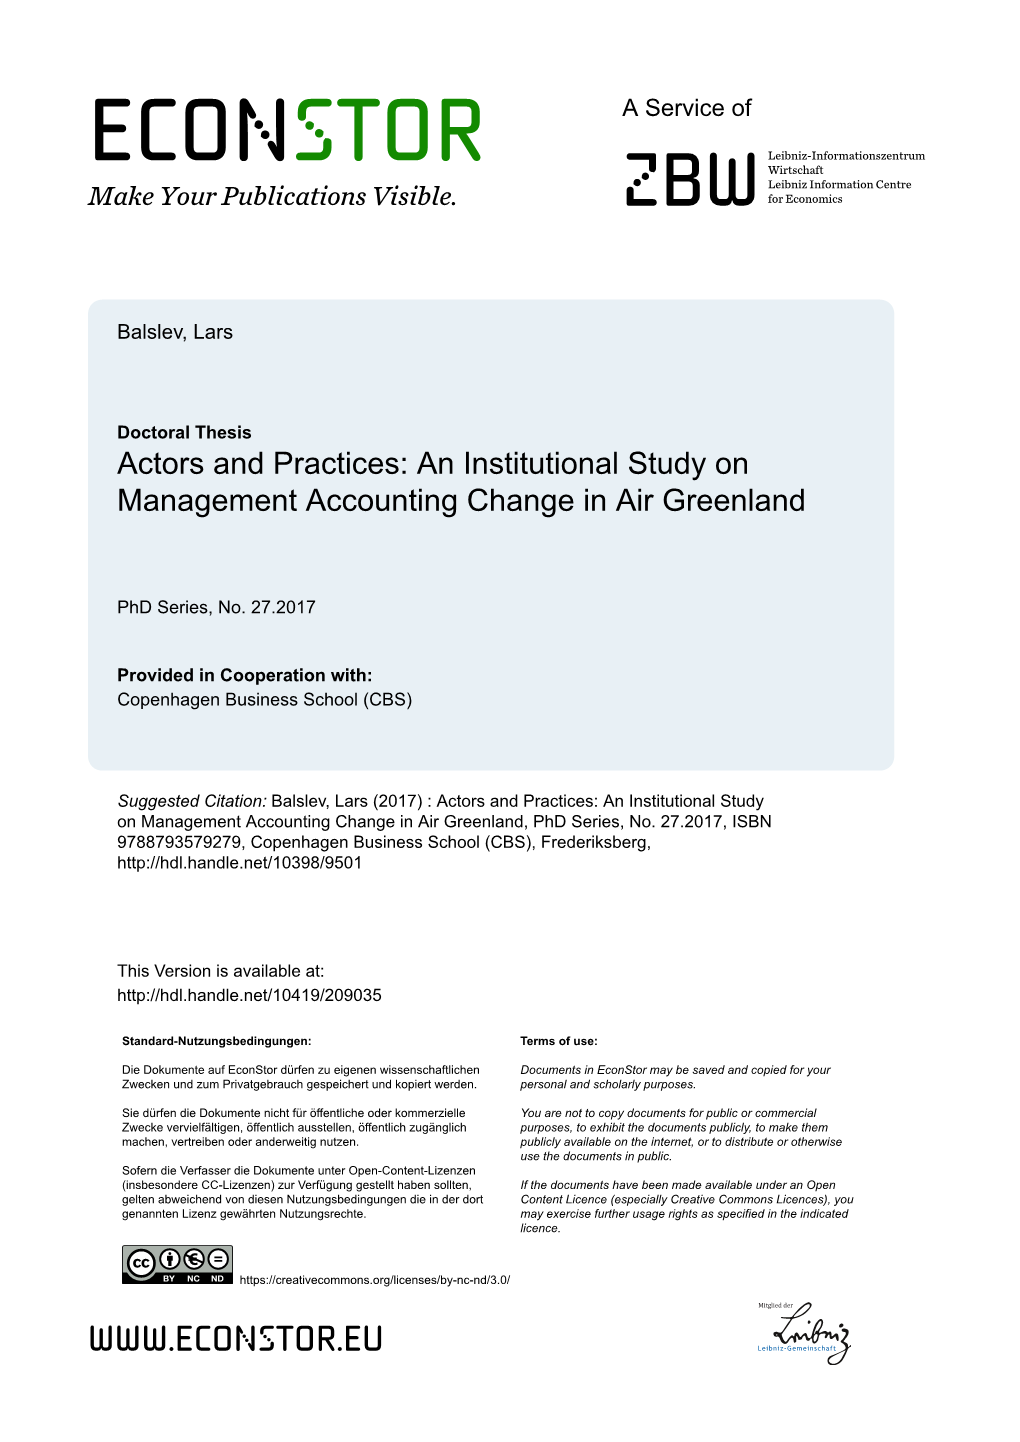 An Institutional Study on Management Accounting Change in Air Greenland